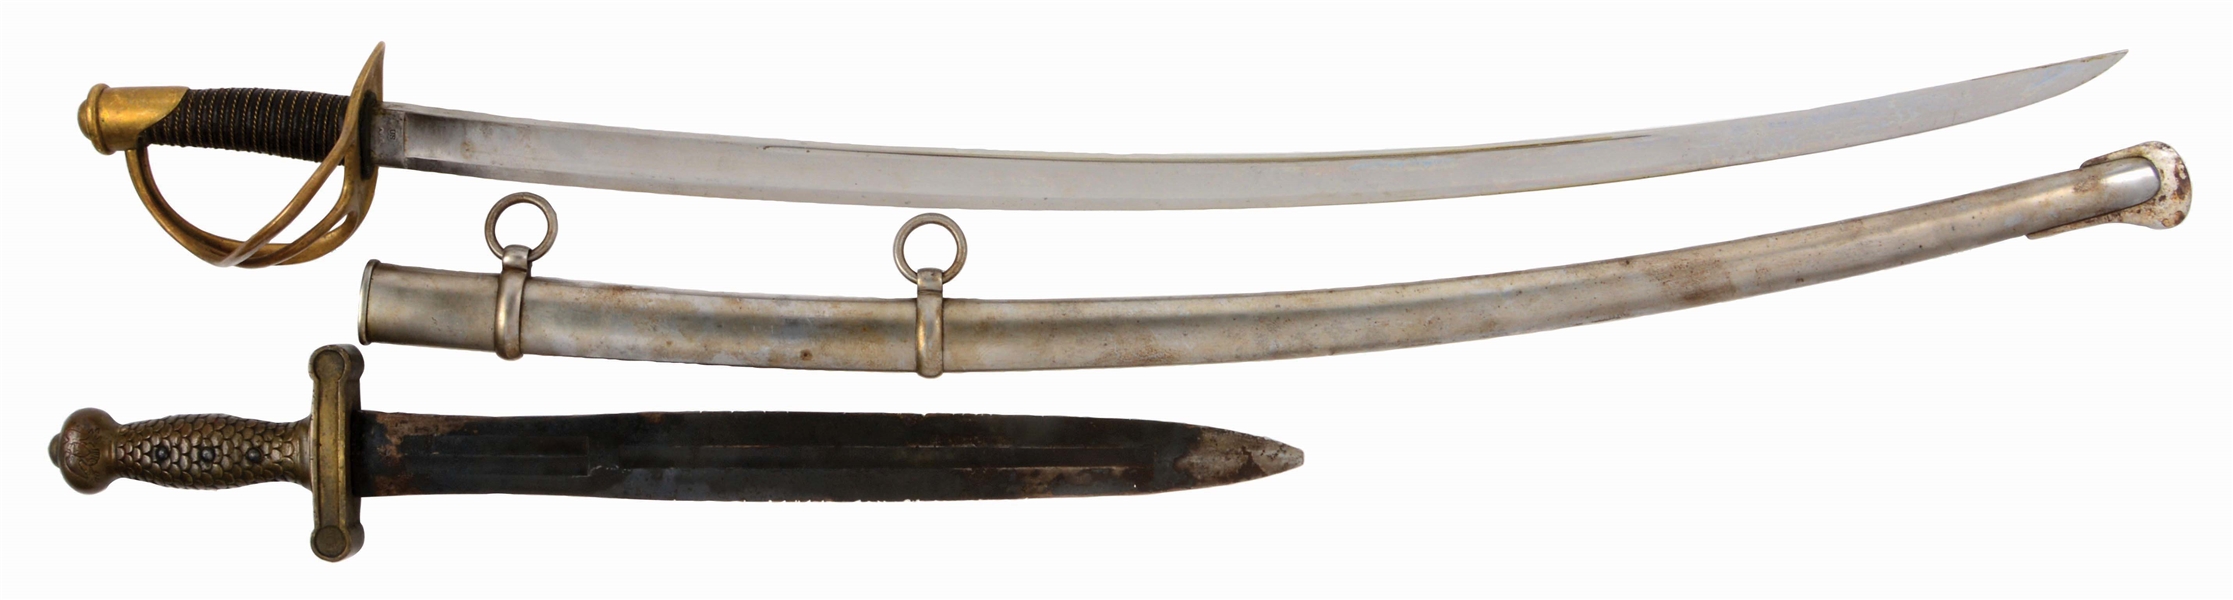 LOT OF TWO: AMES 1840 CAVALRY SABER TOGETHER WITH AN 1833 NAVAL SWORD.